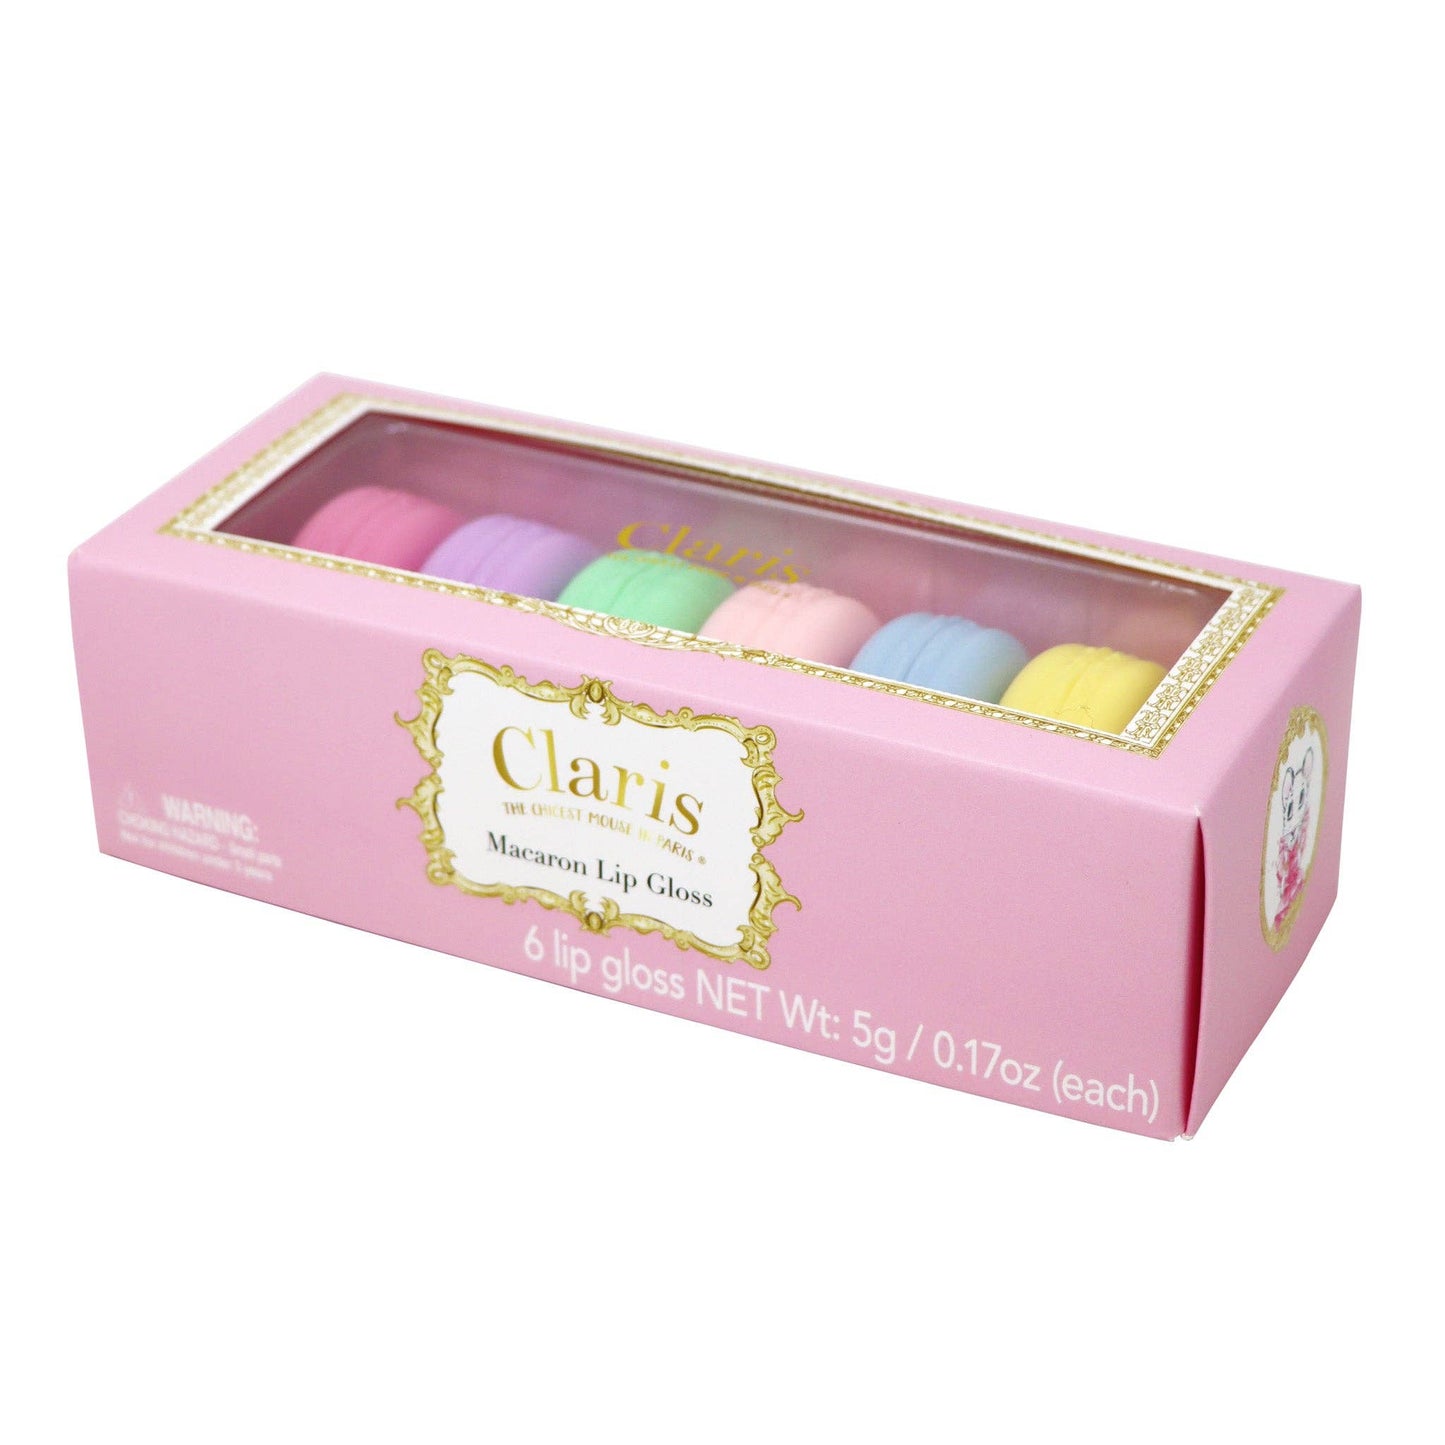 Claris - The Chicest Mouse in Paris™ Macaron Lip Gloss Set